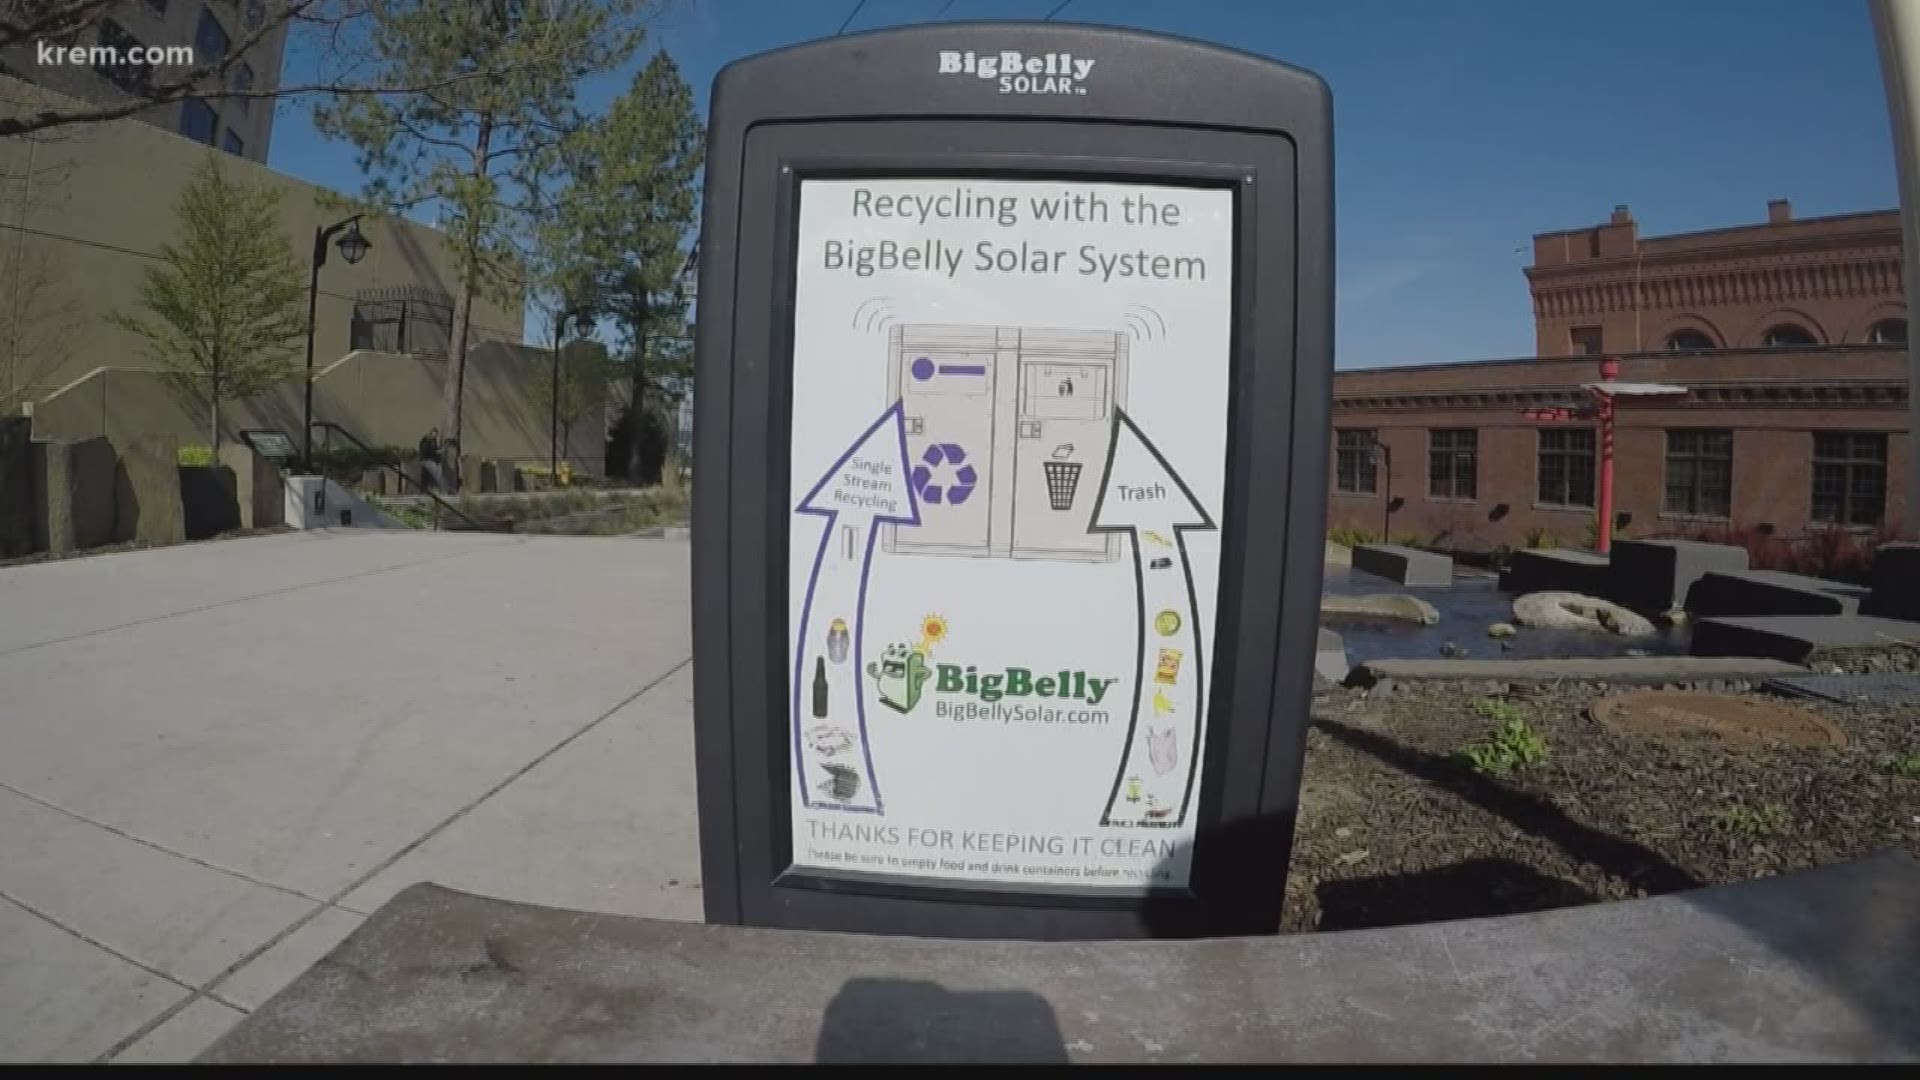 City of Spokane installs new smart waste and recycling bins (4-30-18)